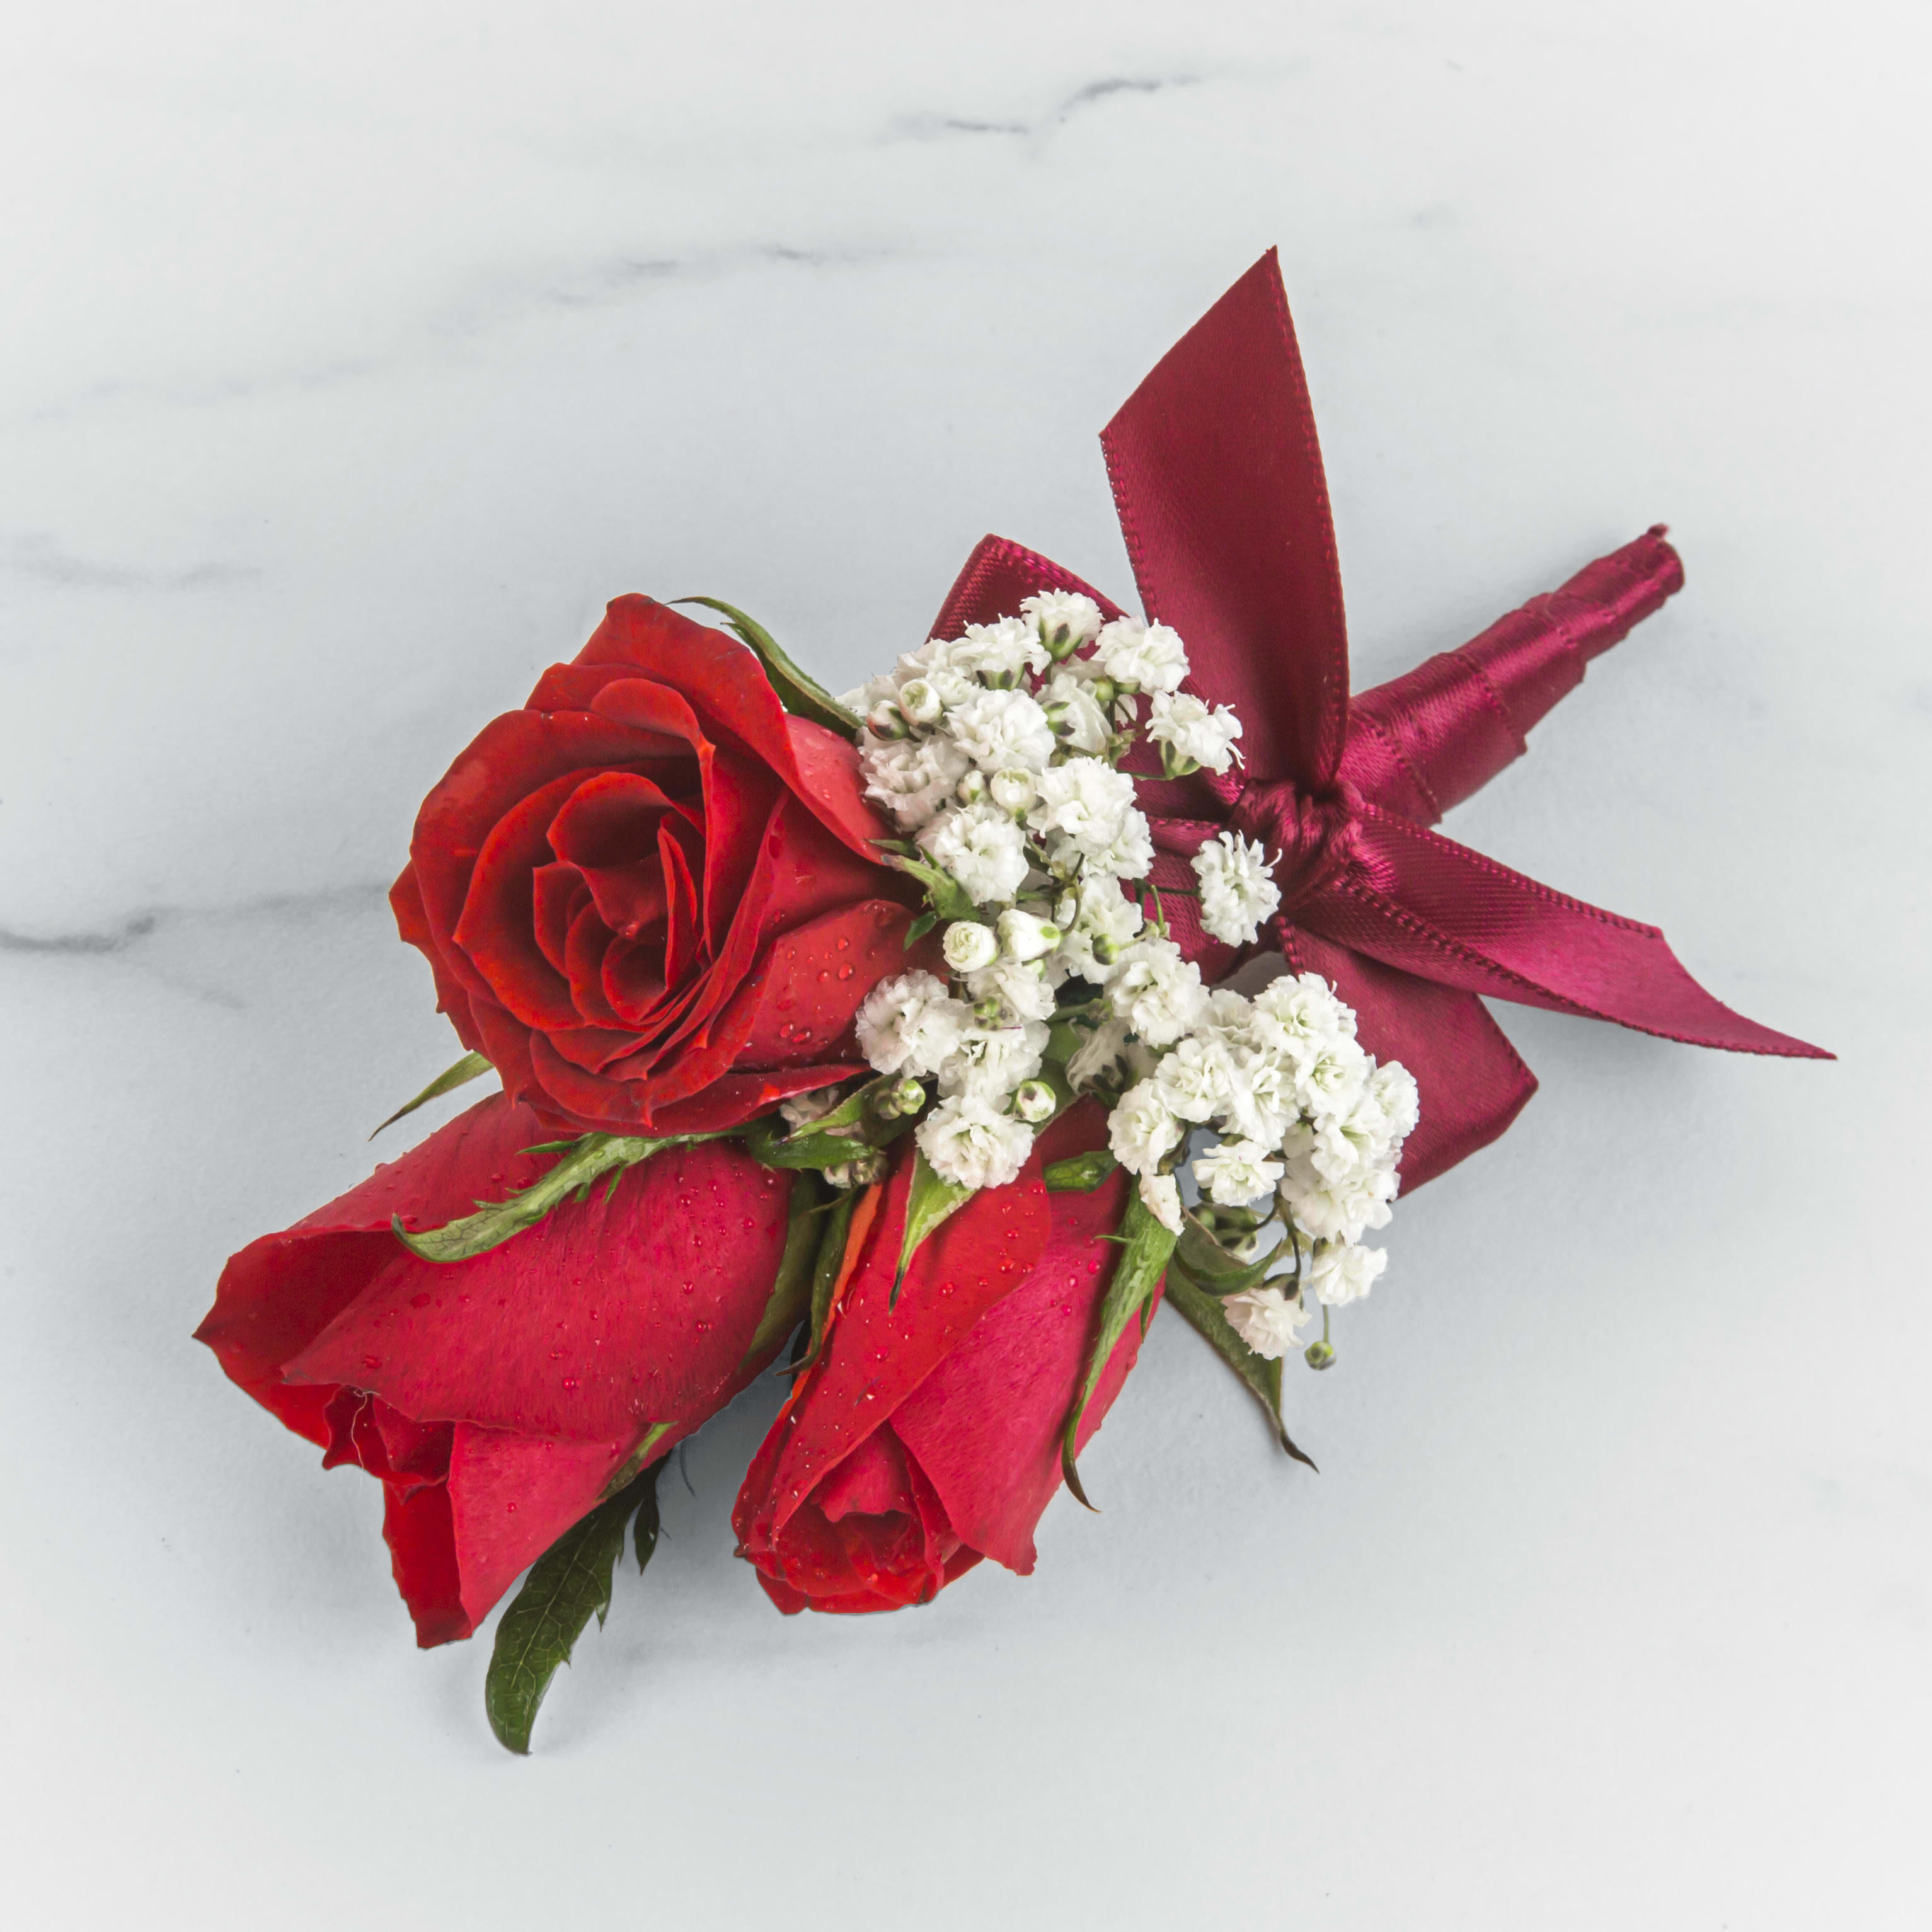 Red Rose Boutonnière by BloomNation™  - A classic red rose boutonnière that compliments any suit. Perfect for prom, formal or wedding events.